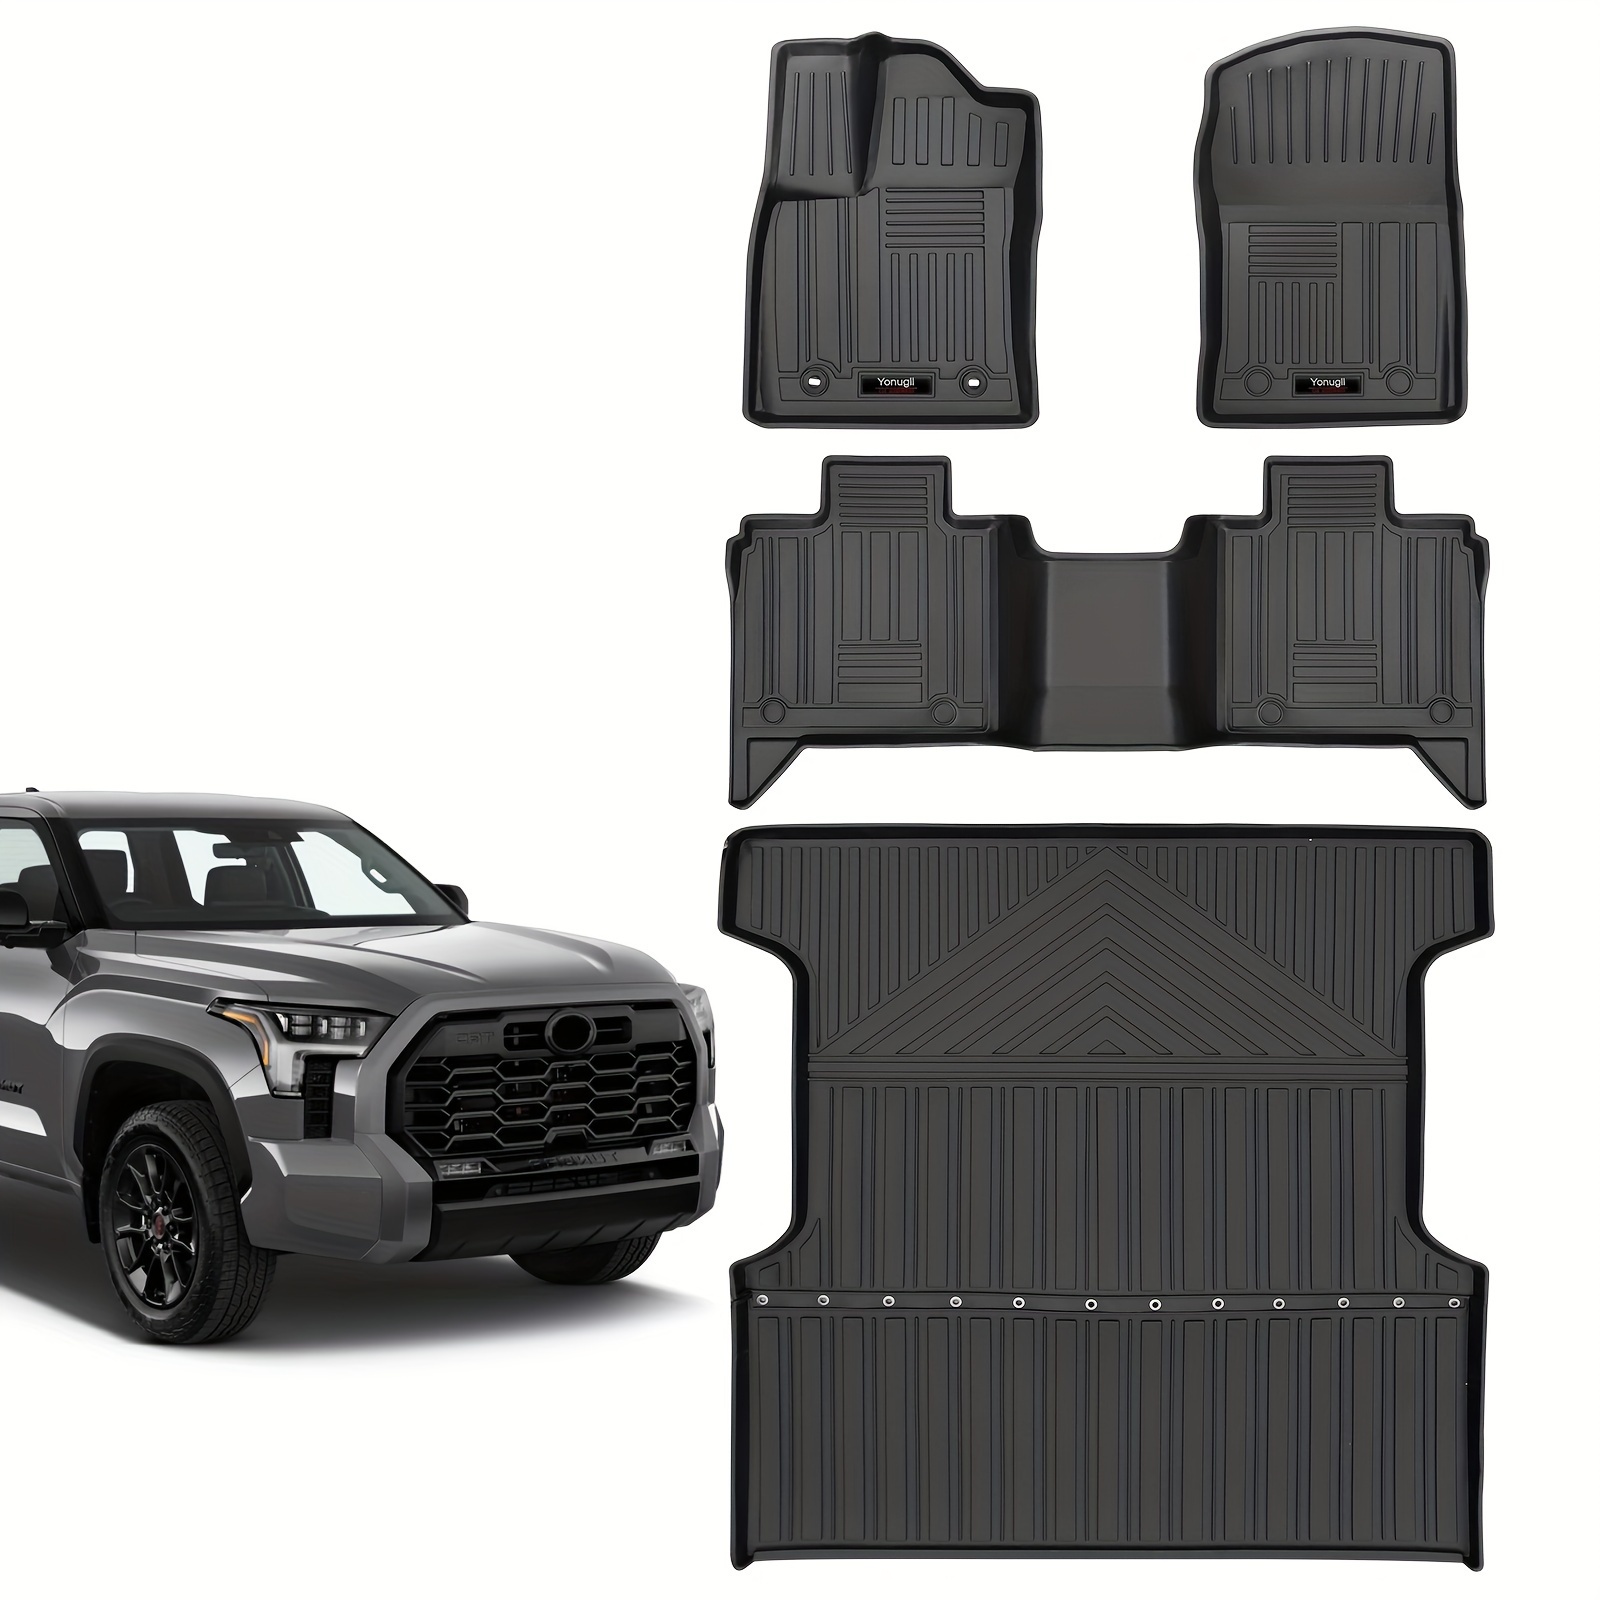 

For Toyota Tundra 2022 2023 2024 Floor Mats And Bed Mat Liner 5.5ft Short All Weather Tpe Rubber Mat Upgrade Materials For Toyota For Tundra Accessories (only For Crewmax Cab)